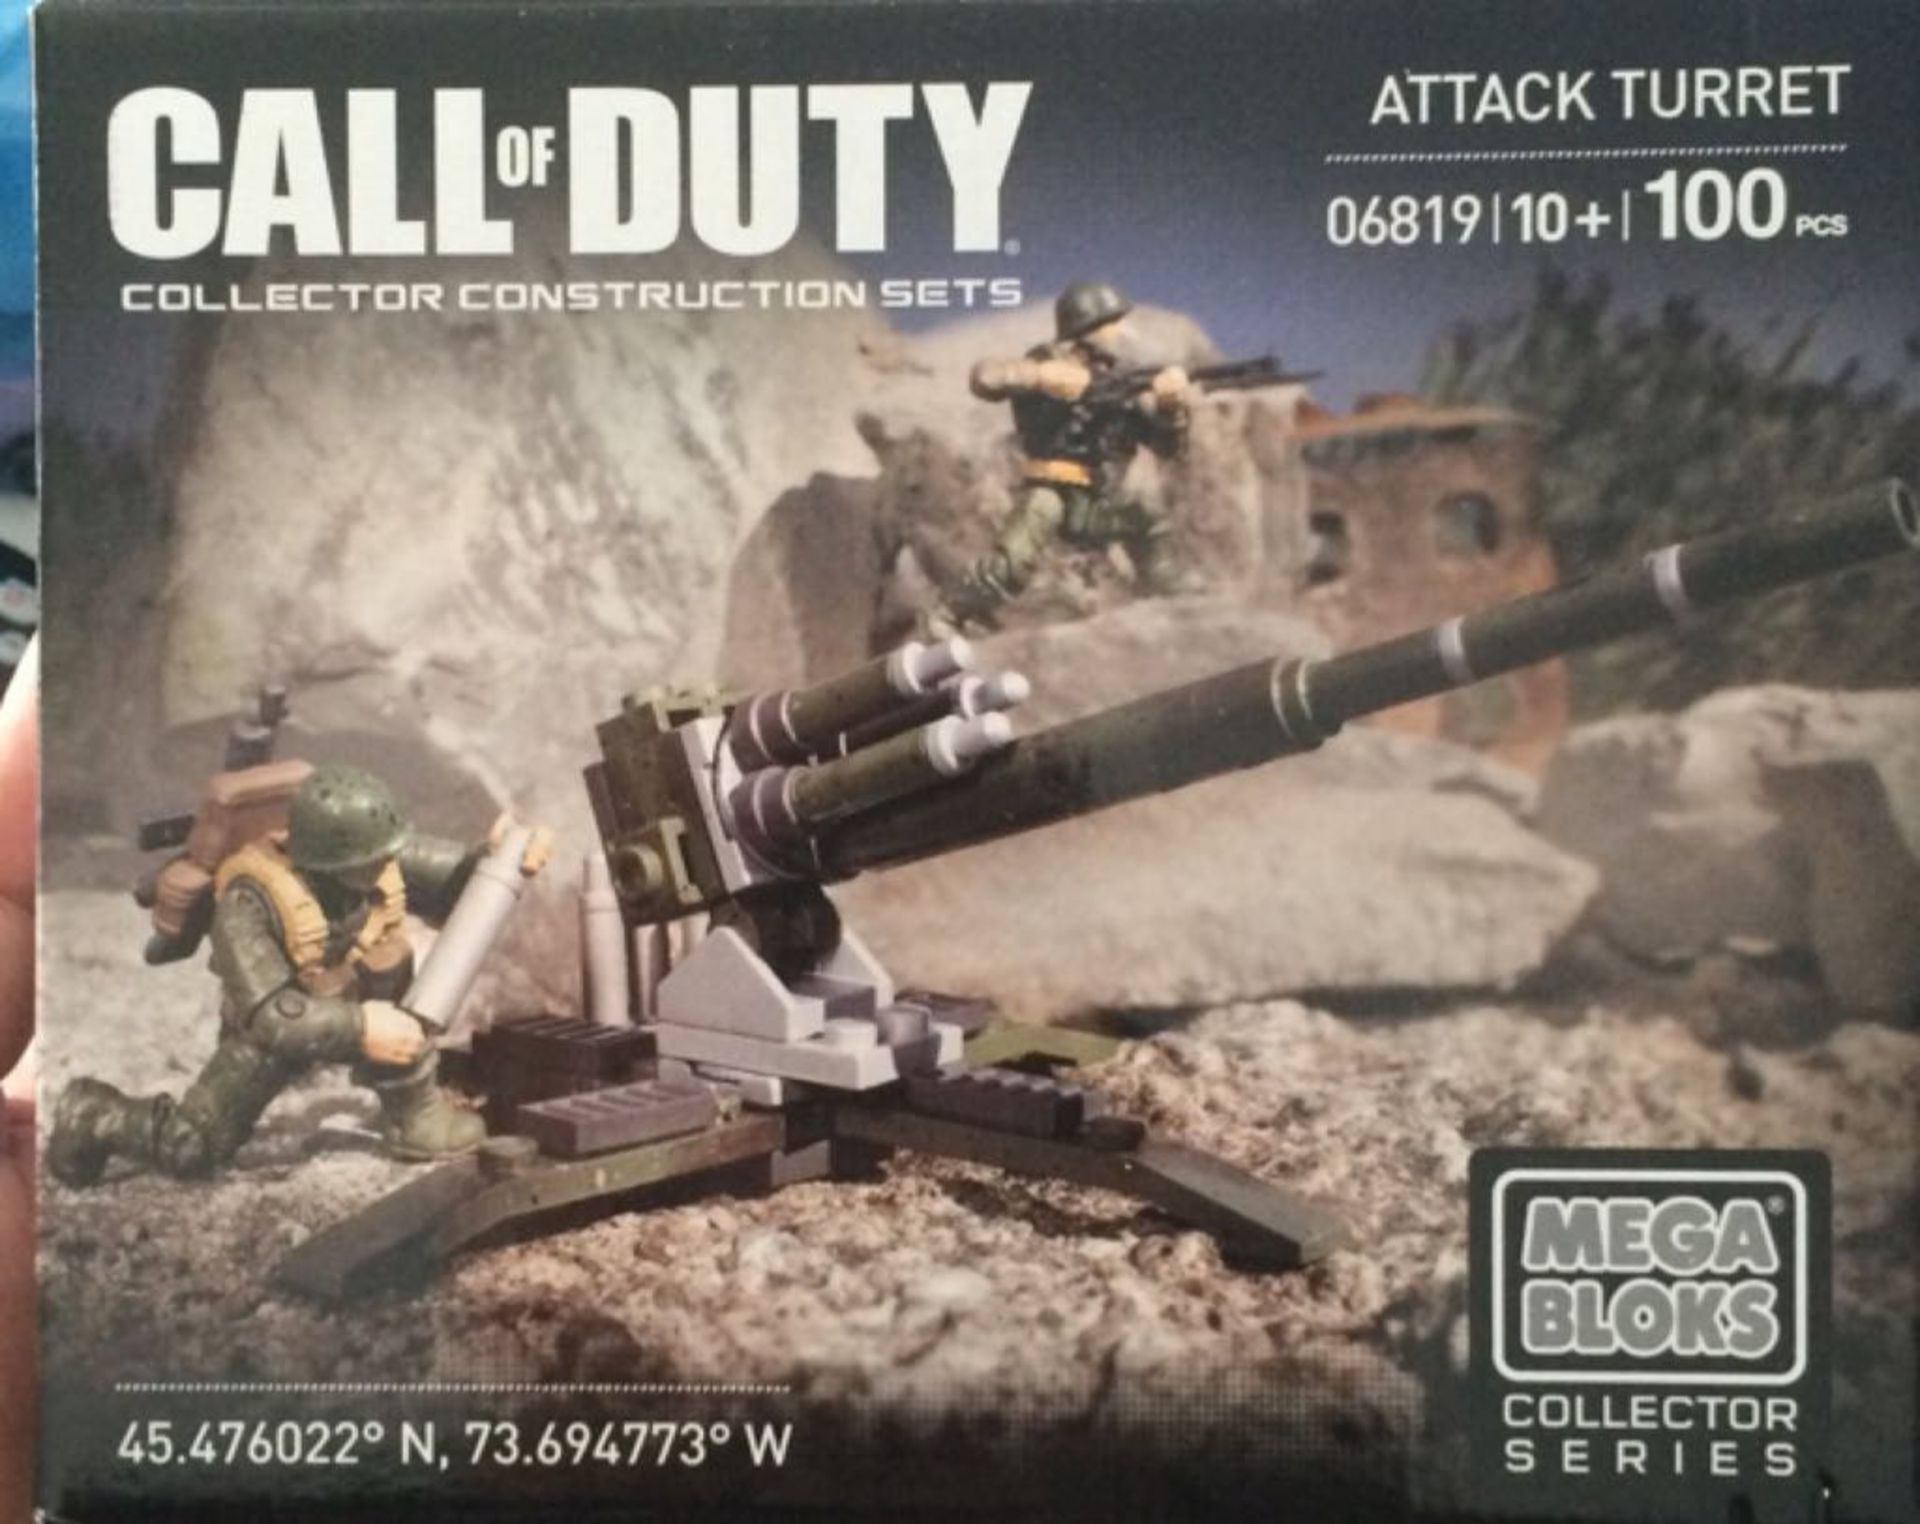 V *TRADE QTY* Brand New Call Of Duty Mega Blocks Collector Series Attack Turrent eBay Price £16.99 X